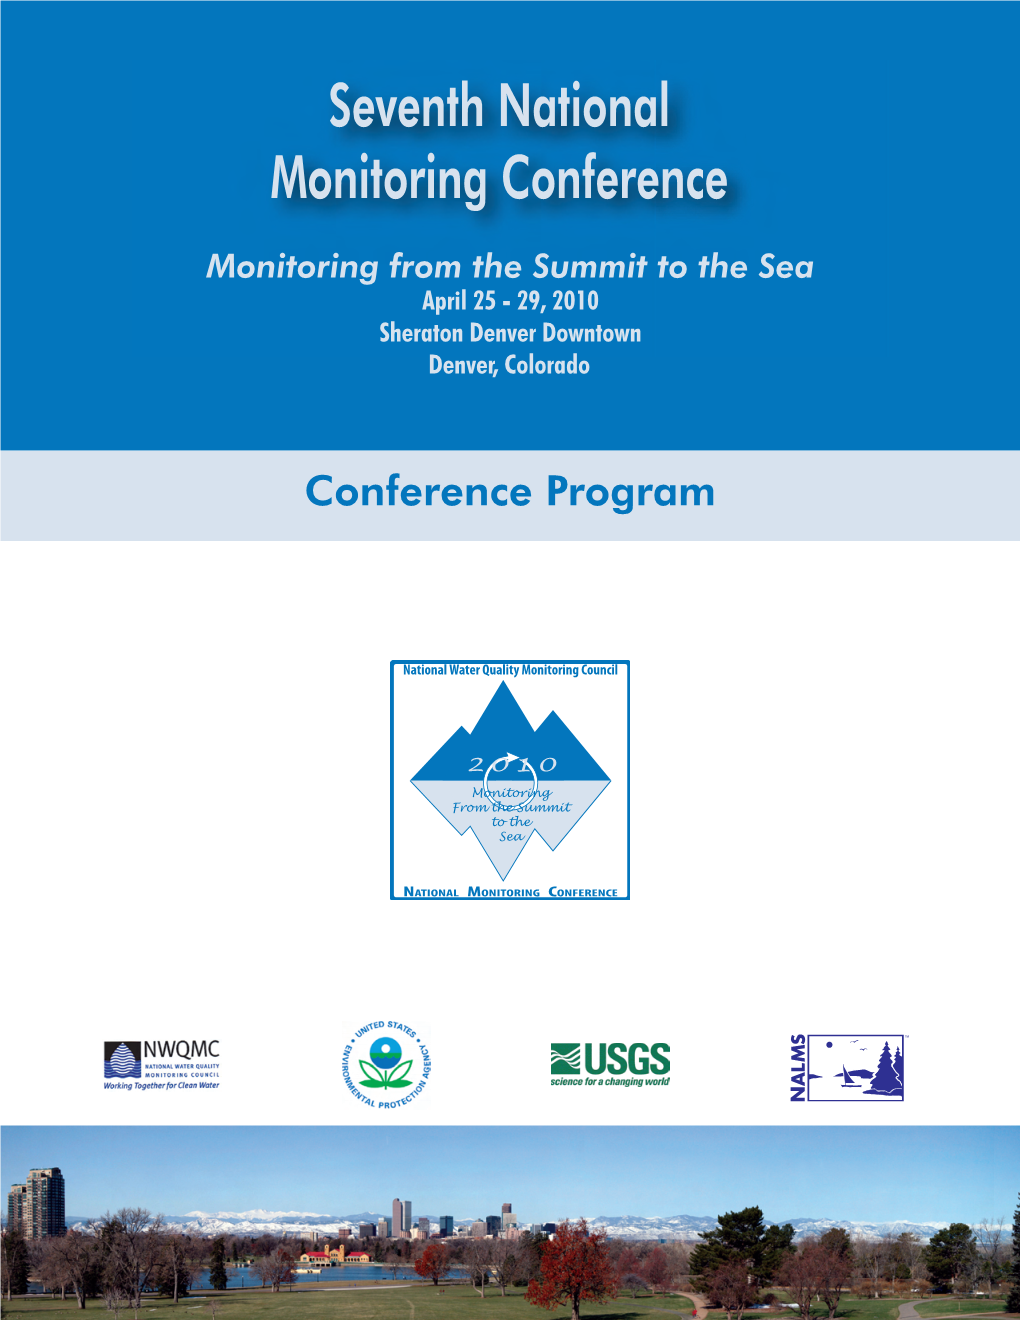 Seventh National Monitoring Conference!!